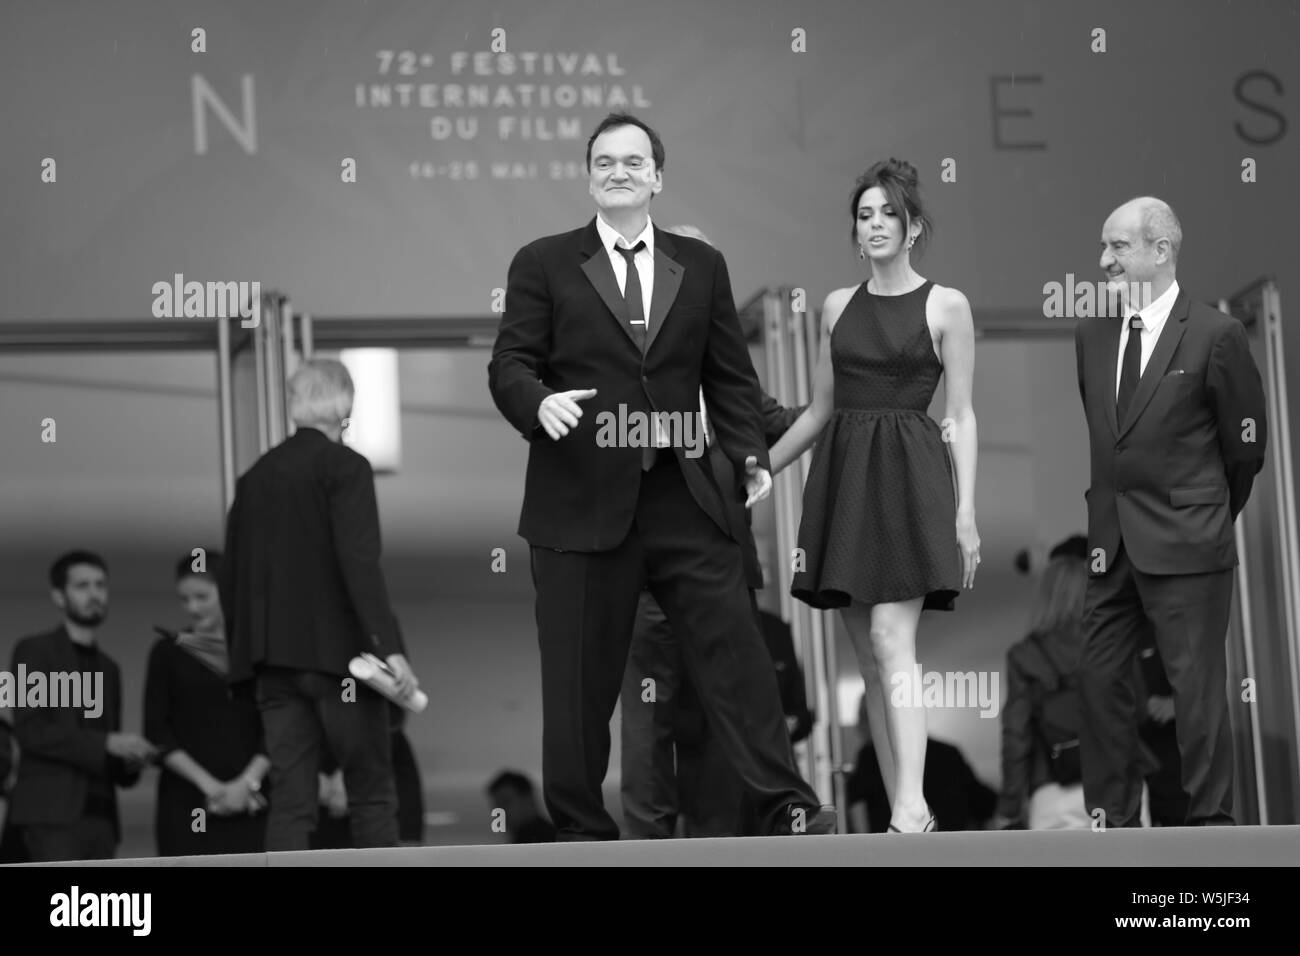 CANNES, FRANCE - MAY 18: Quentin Tarantino, Daniella Pick and Thierry Fremaux attend The Wild Goose Lake screening during the 72nd Cannes Film Festiva Stock Photo